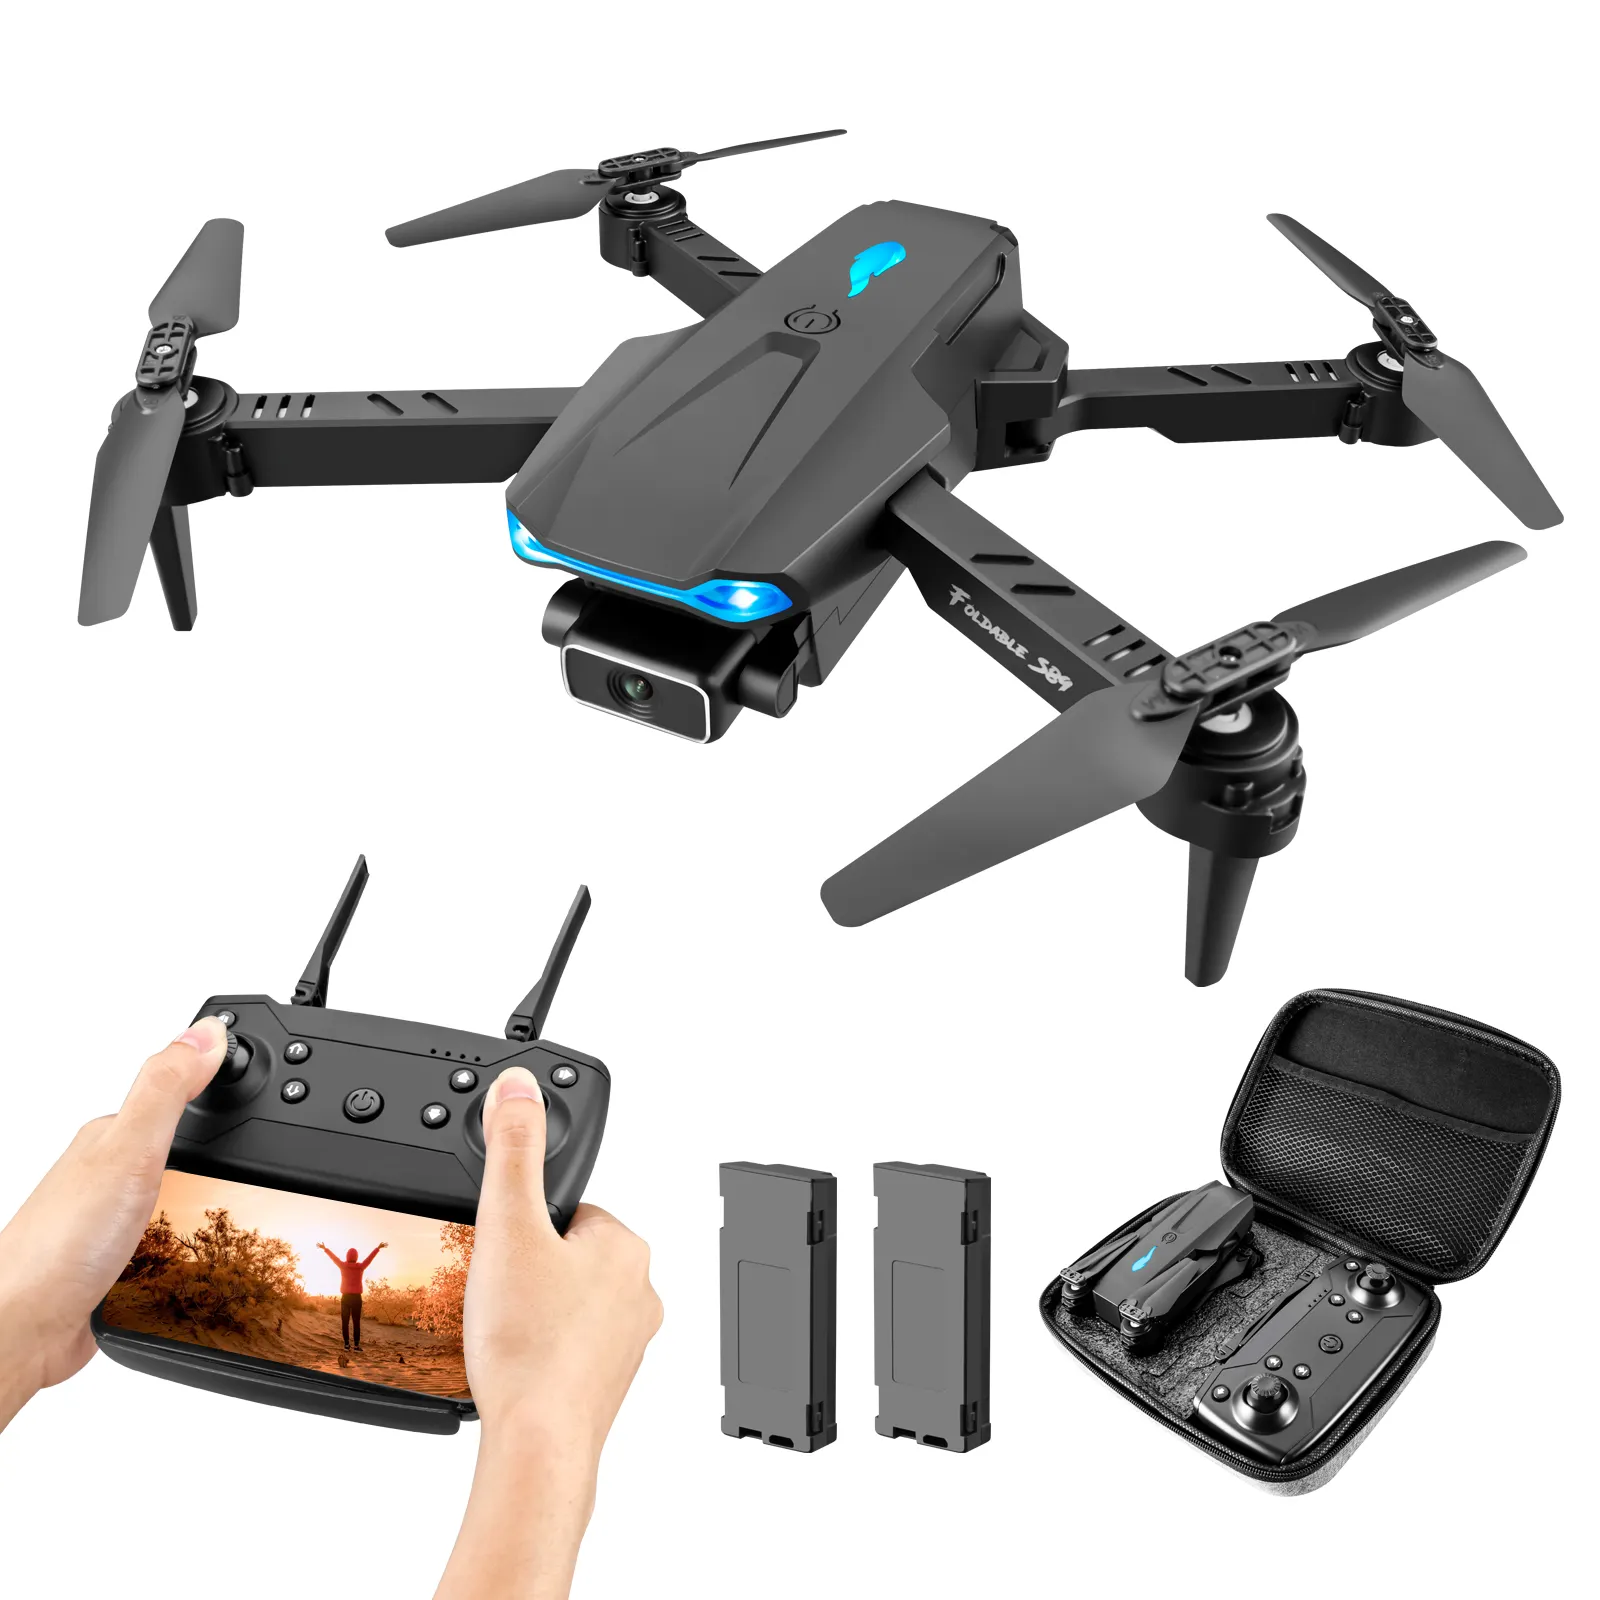 China Hight Hold Mode Professional quadcopter Drones without camera Private Mold RC drone toys for kids vs JJRC tello